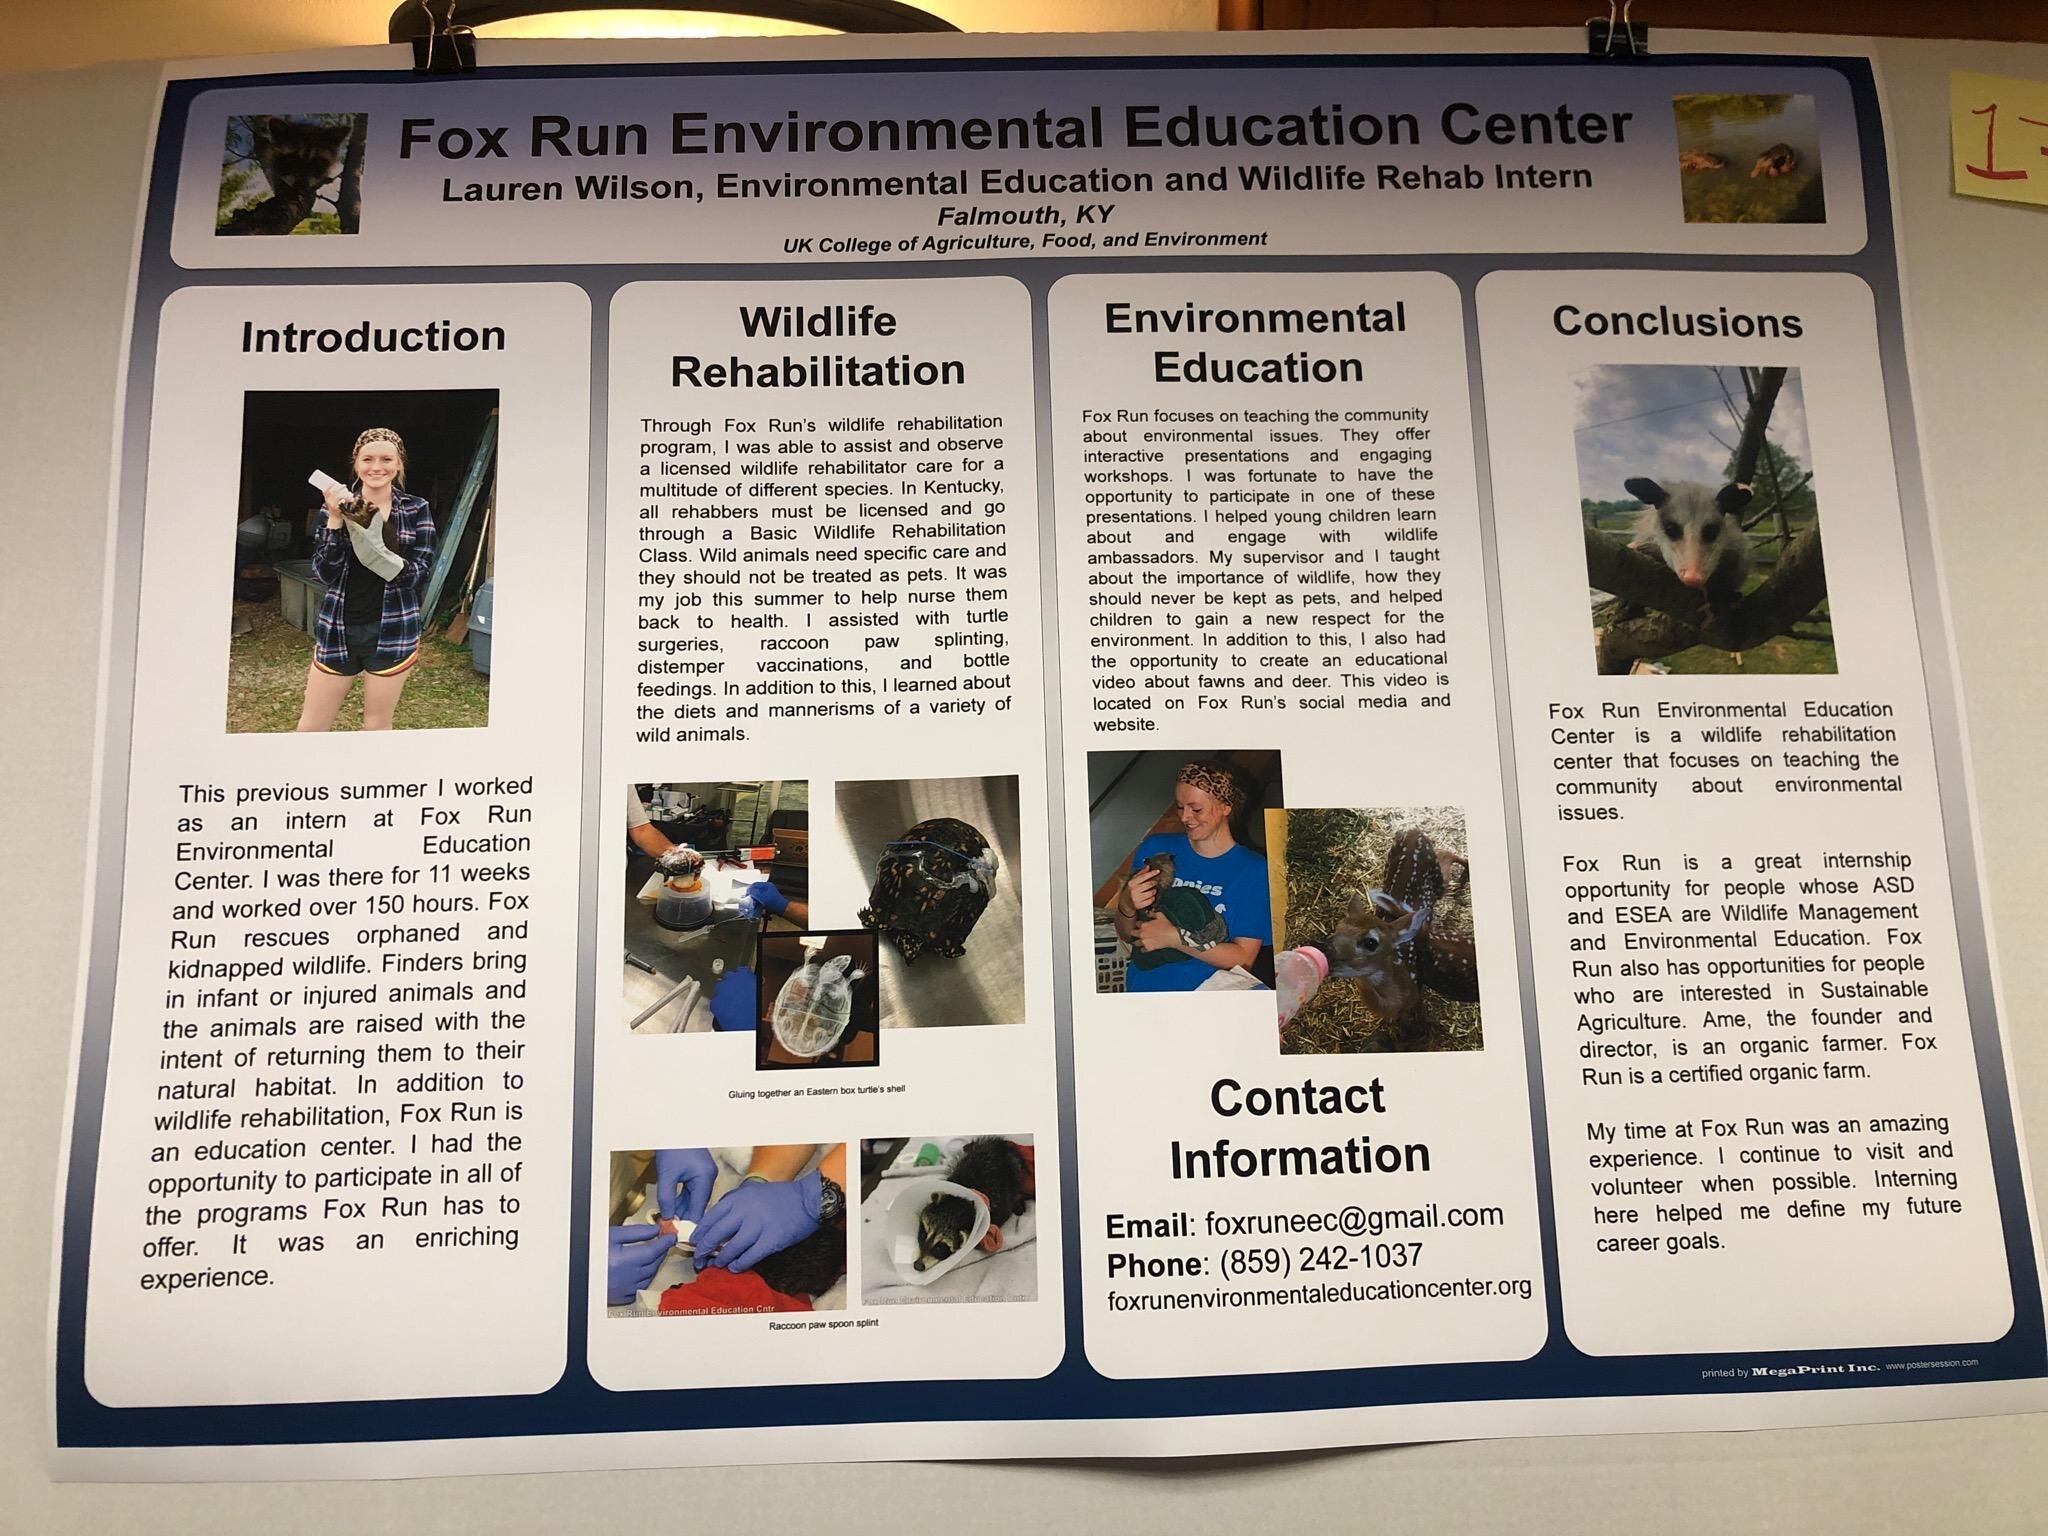 Our 2019 summer Intern Lauren earned 3 credits from the University of Kentucky and presented this fabulous poster to her classmates.